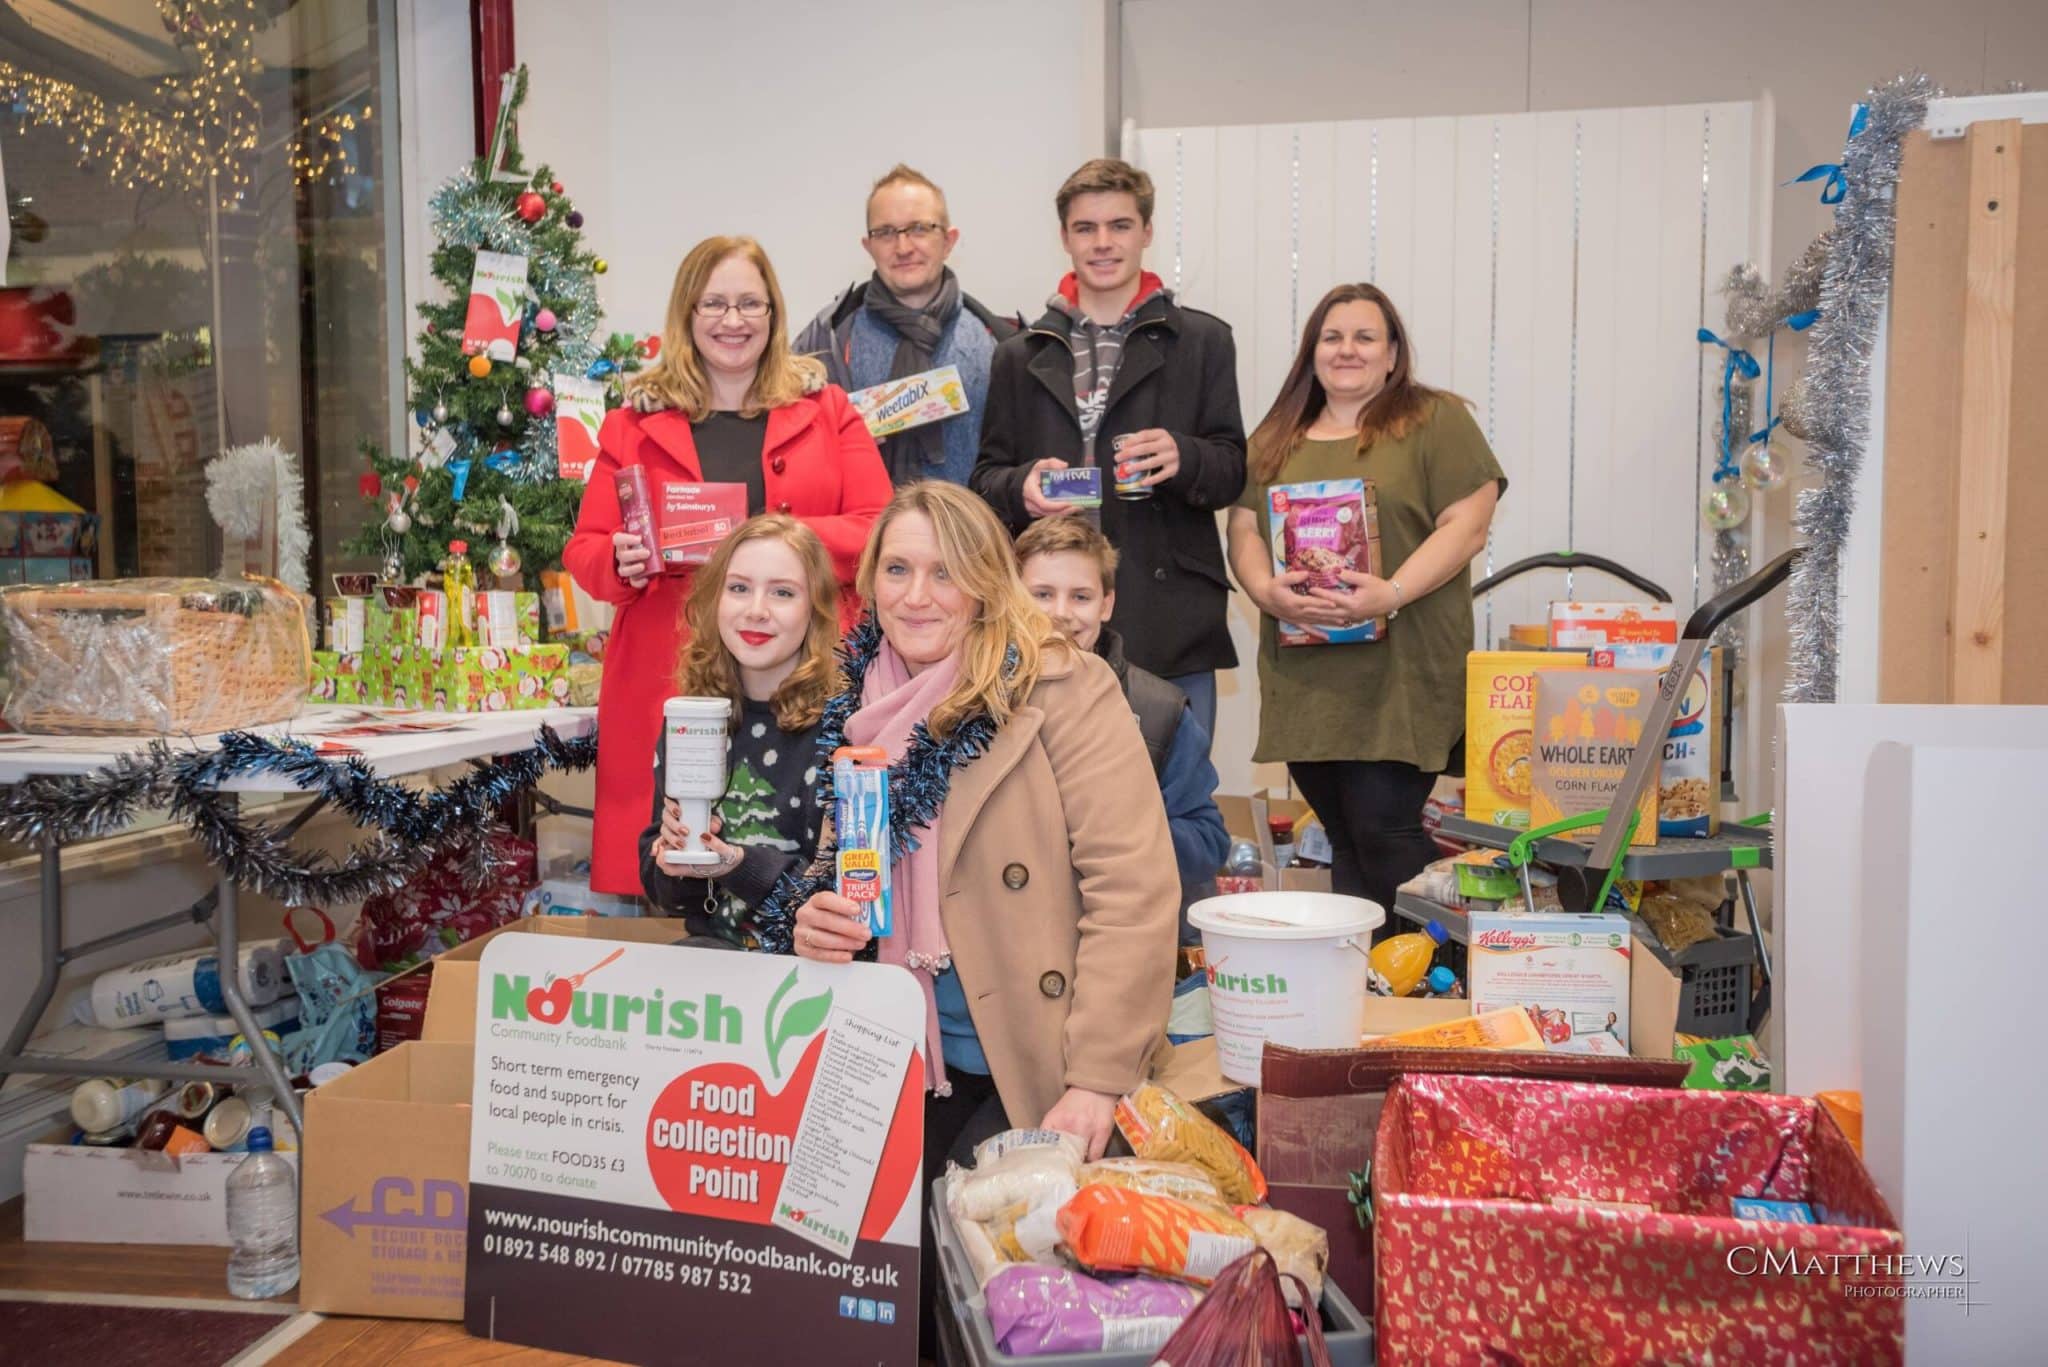 Nourish Community Foodbank is five years old but it still needs your support this Christmas